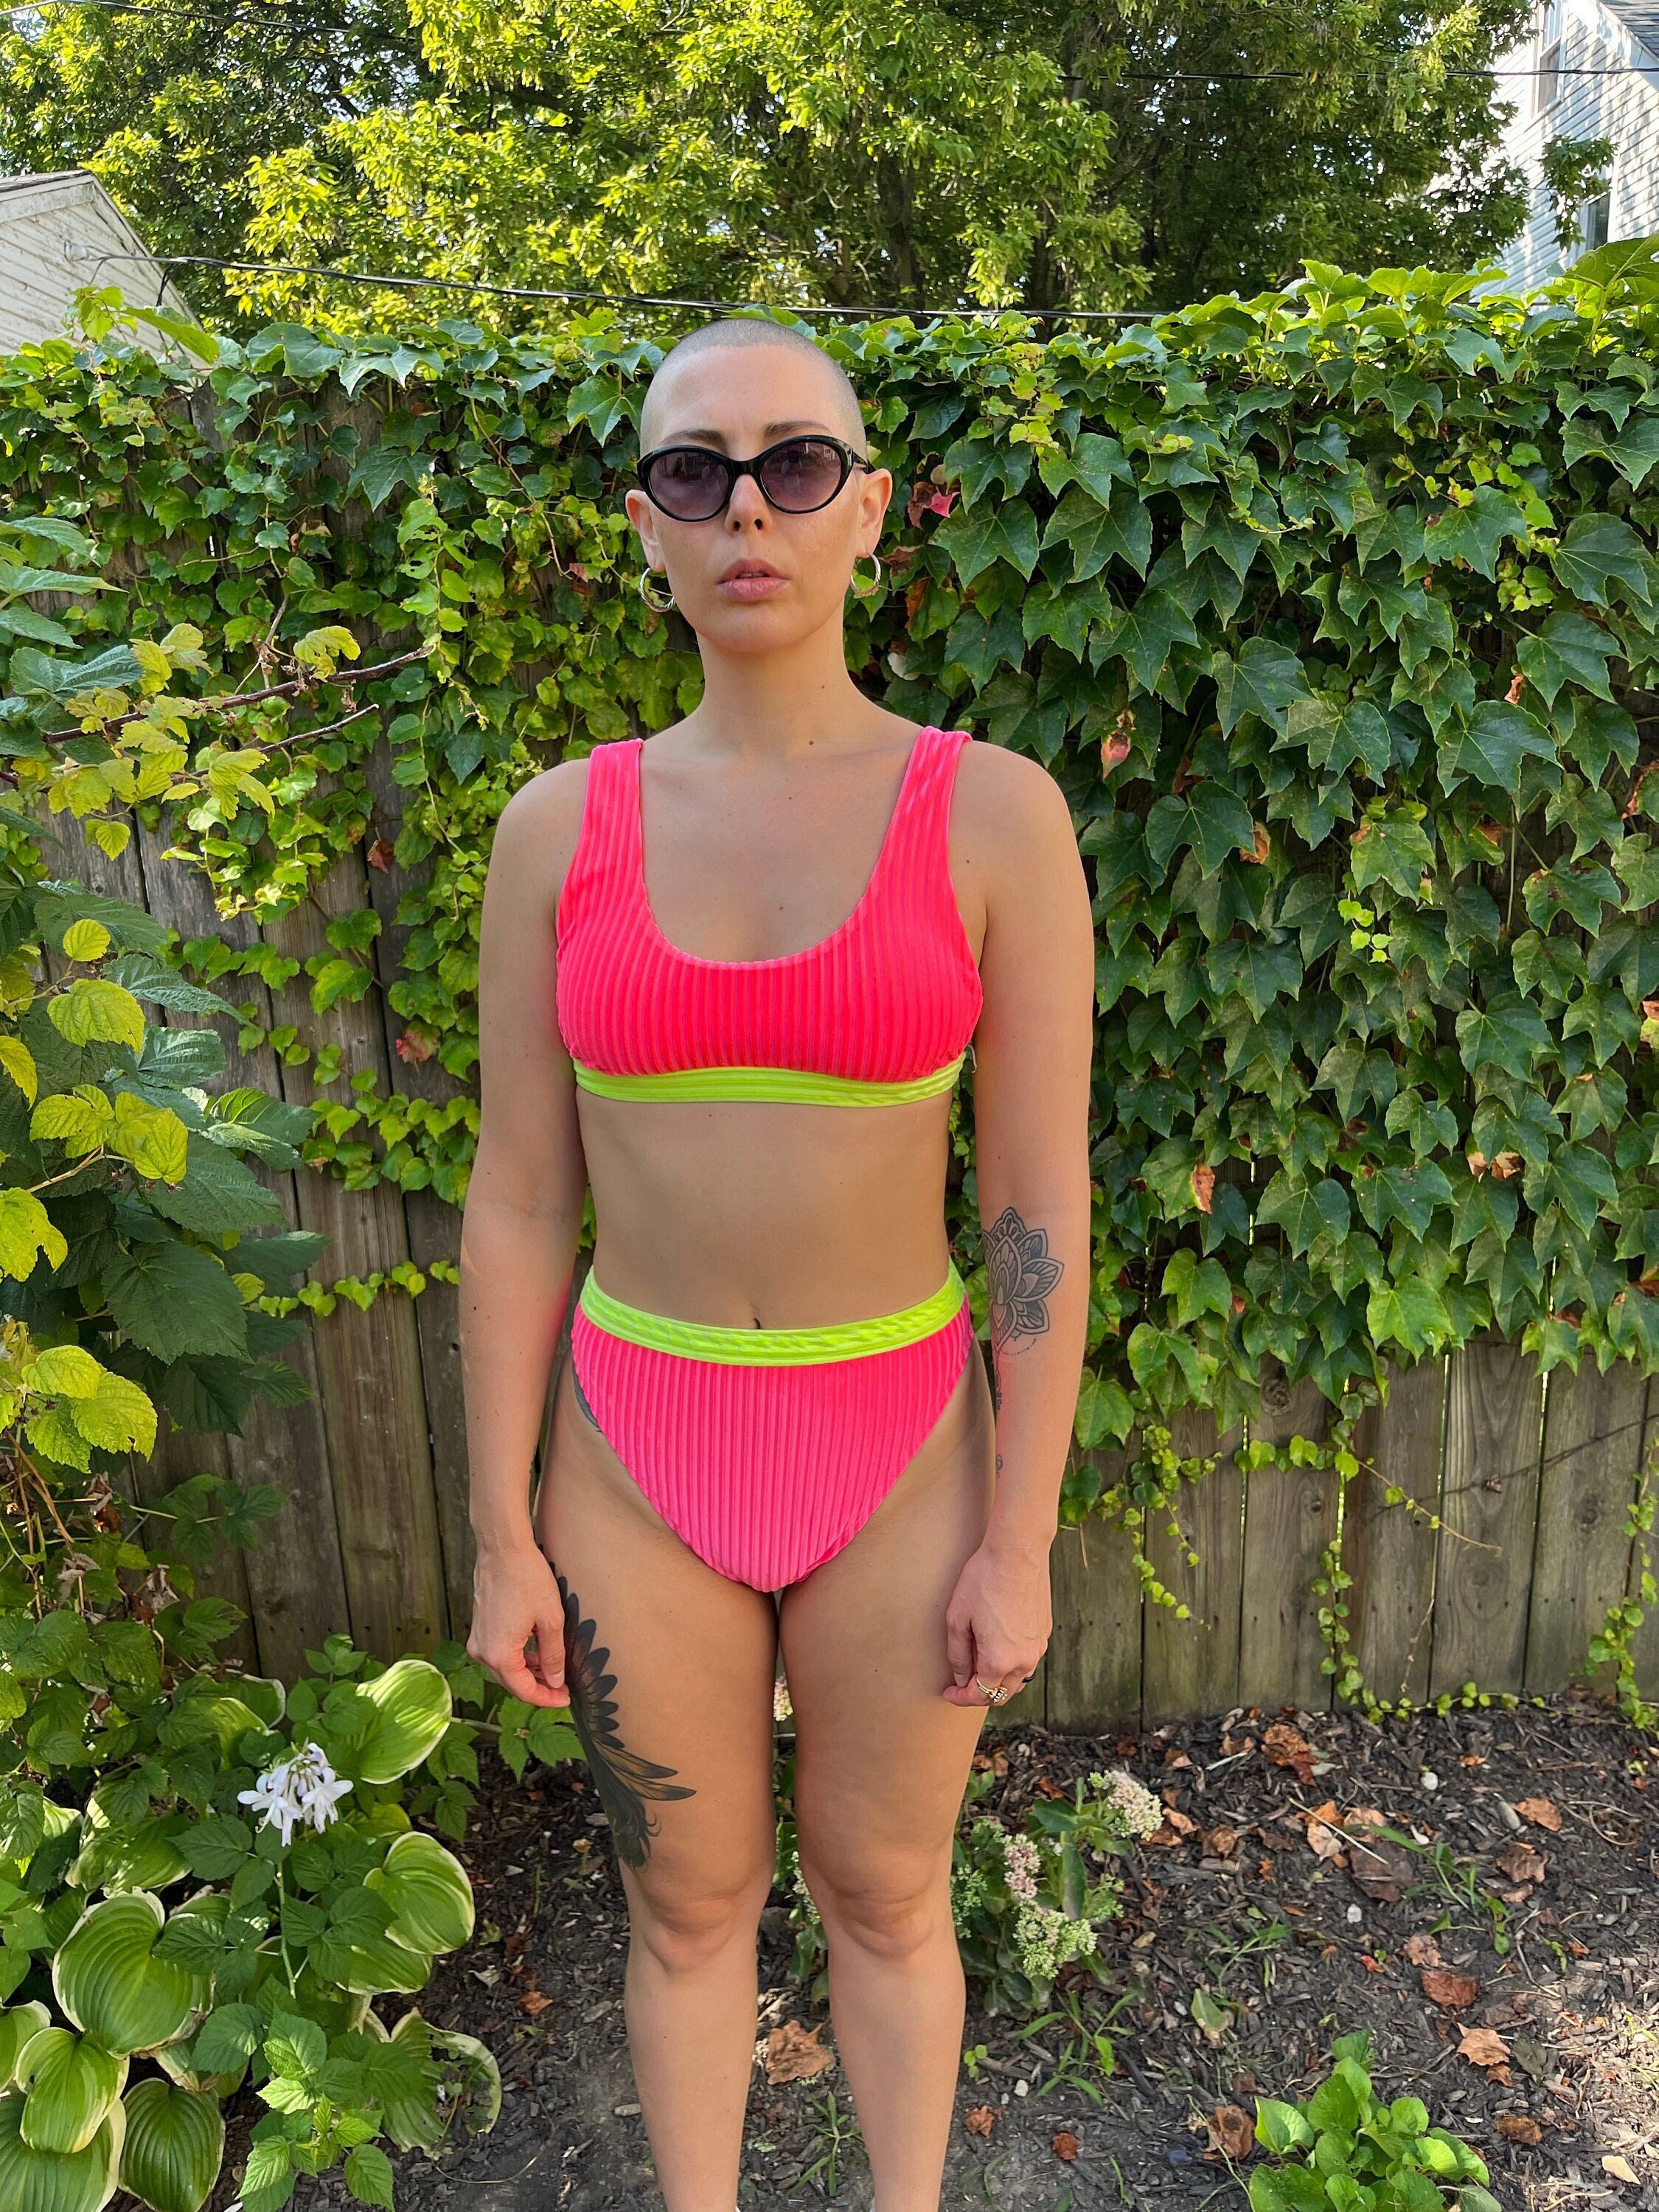 Dippin' Daisy's Swimwear Review — Best Trends For Life